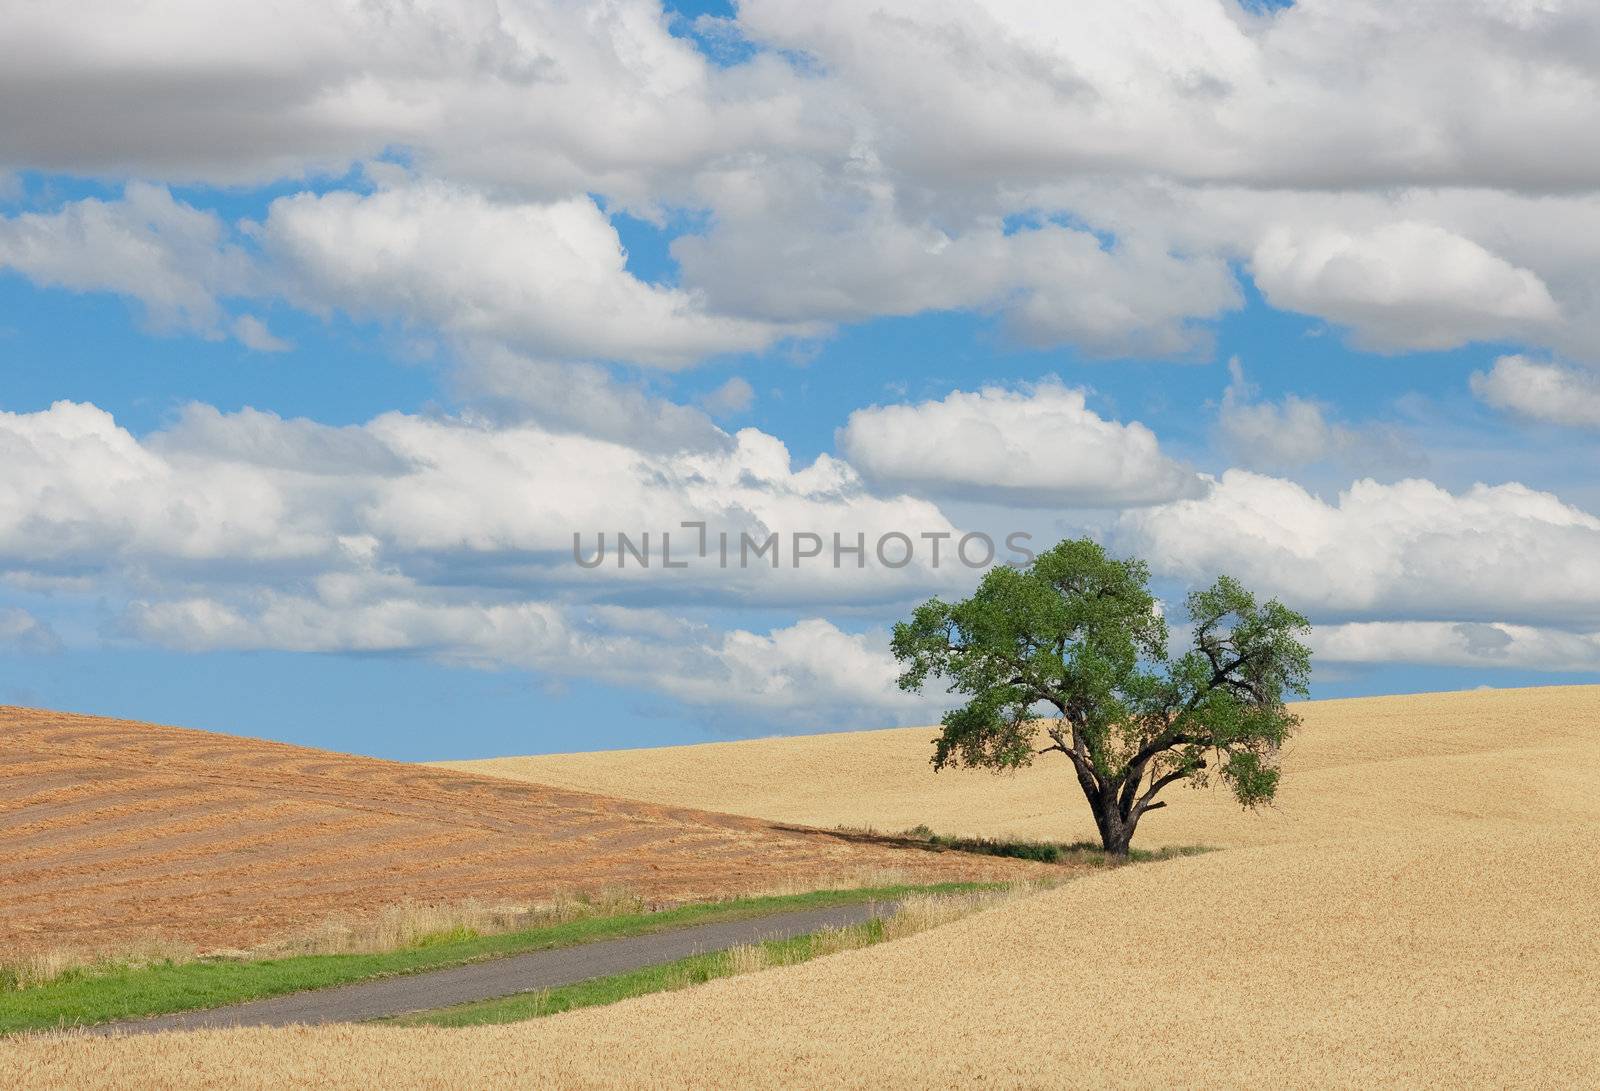 Willow tree, wheat field, rural road and clouds, Whitman County, Washington, USA